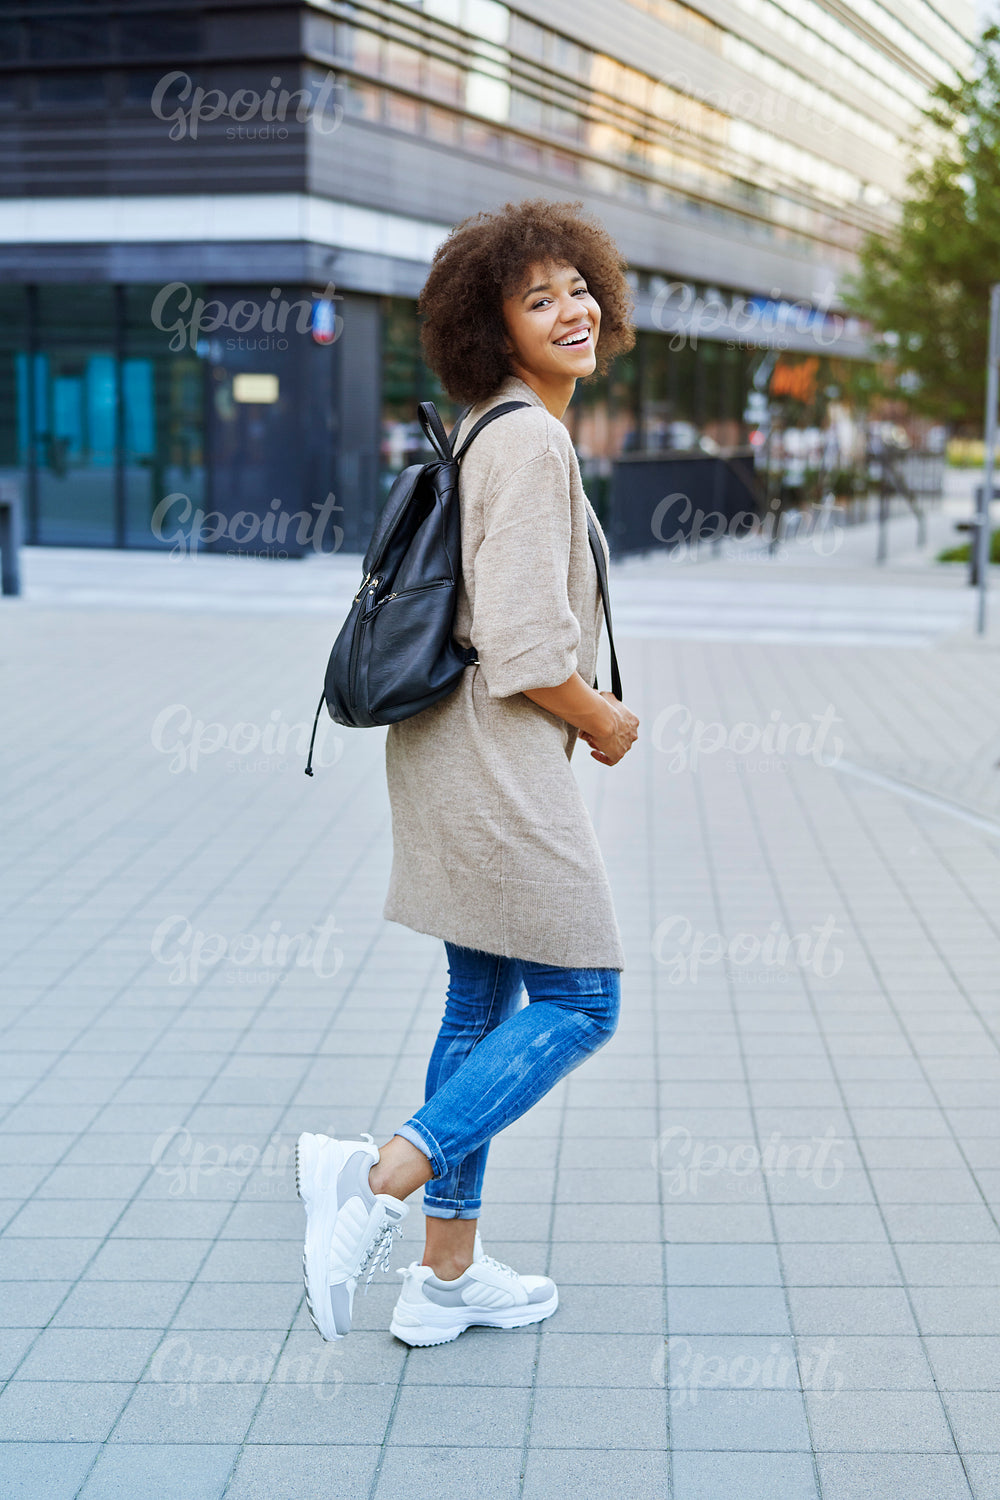 Smiling woman with backpack outdoors